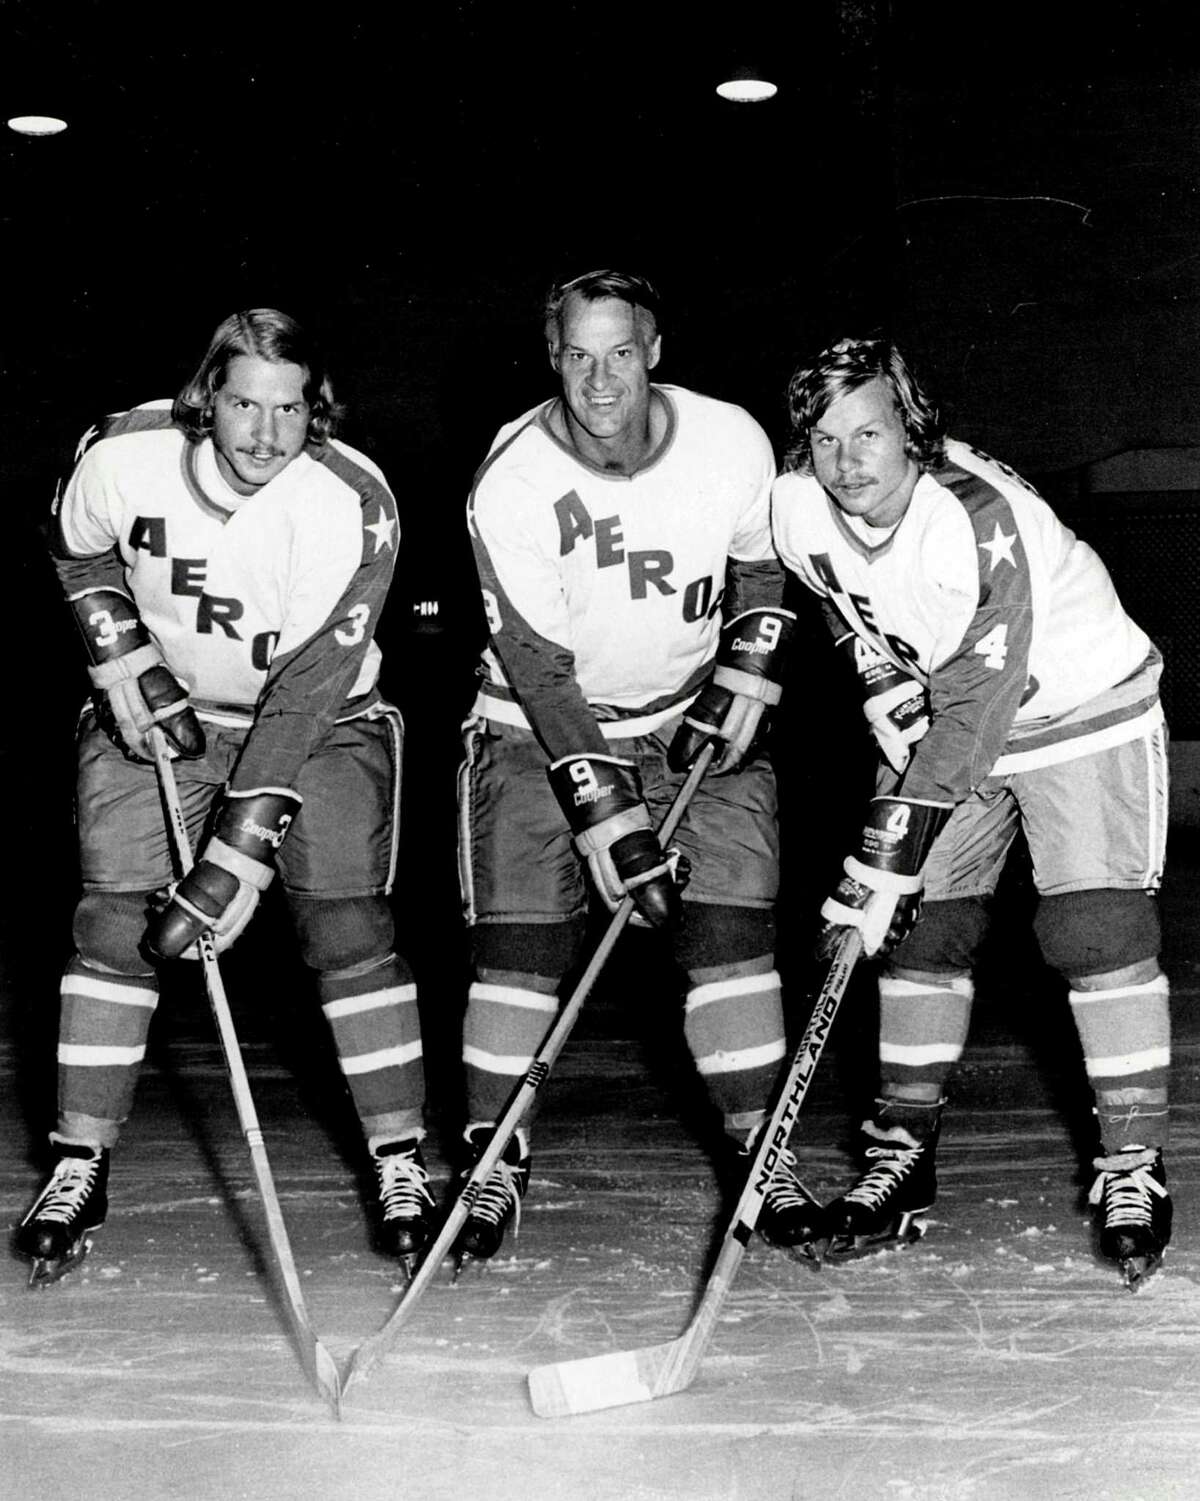 R.I.P. Gordie Howe, Number 9 and great ambassador for the NHL